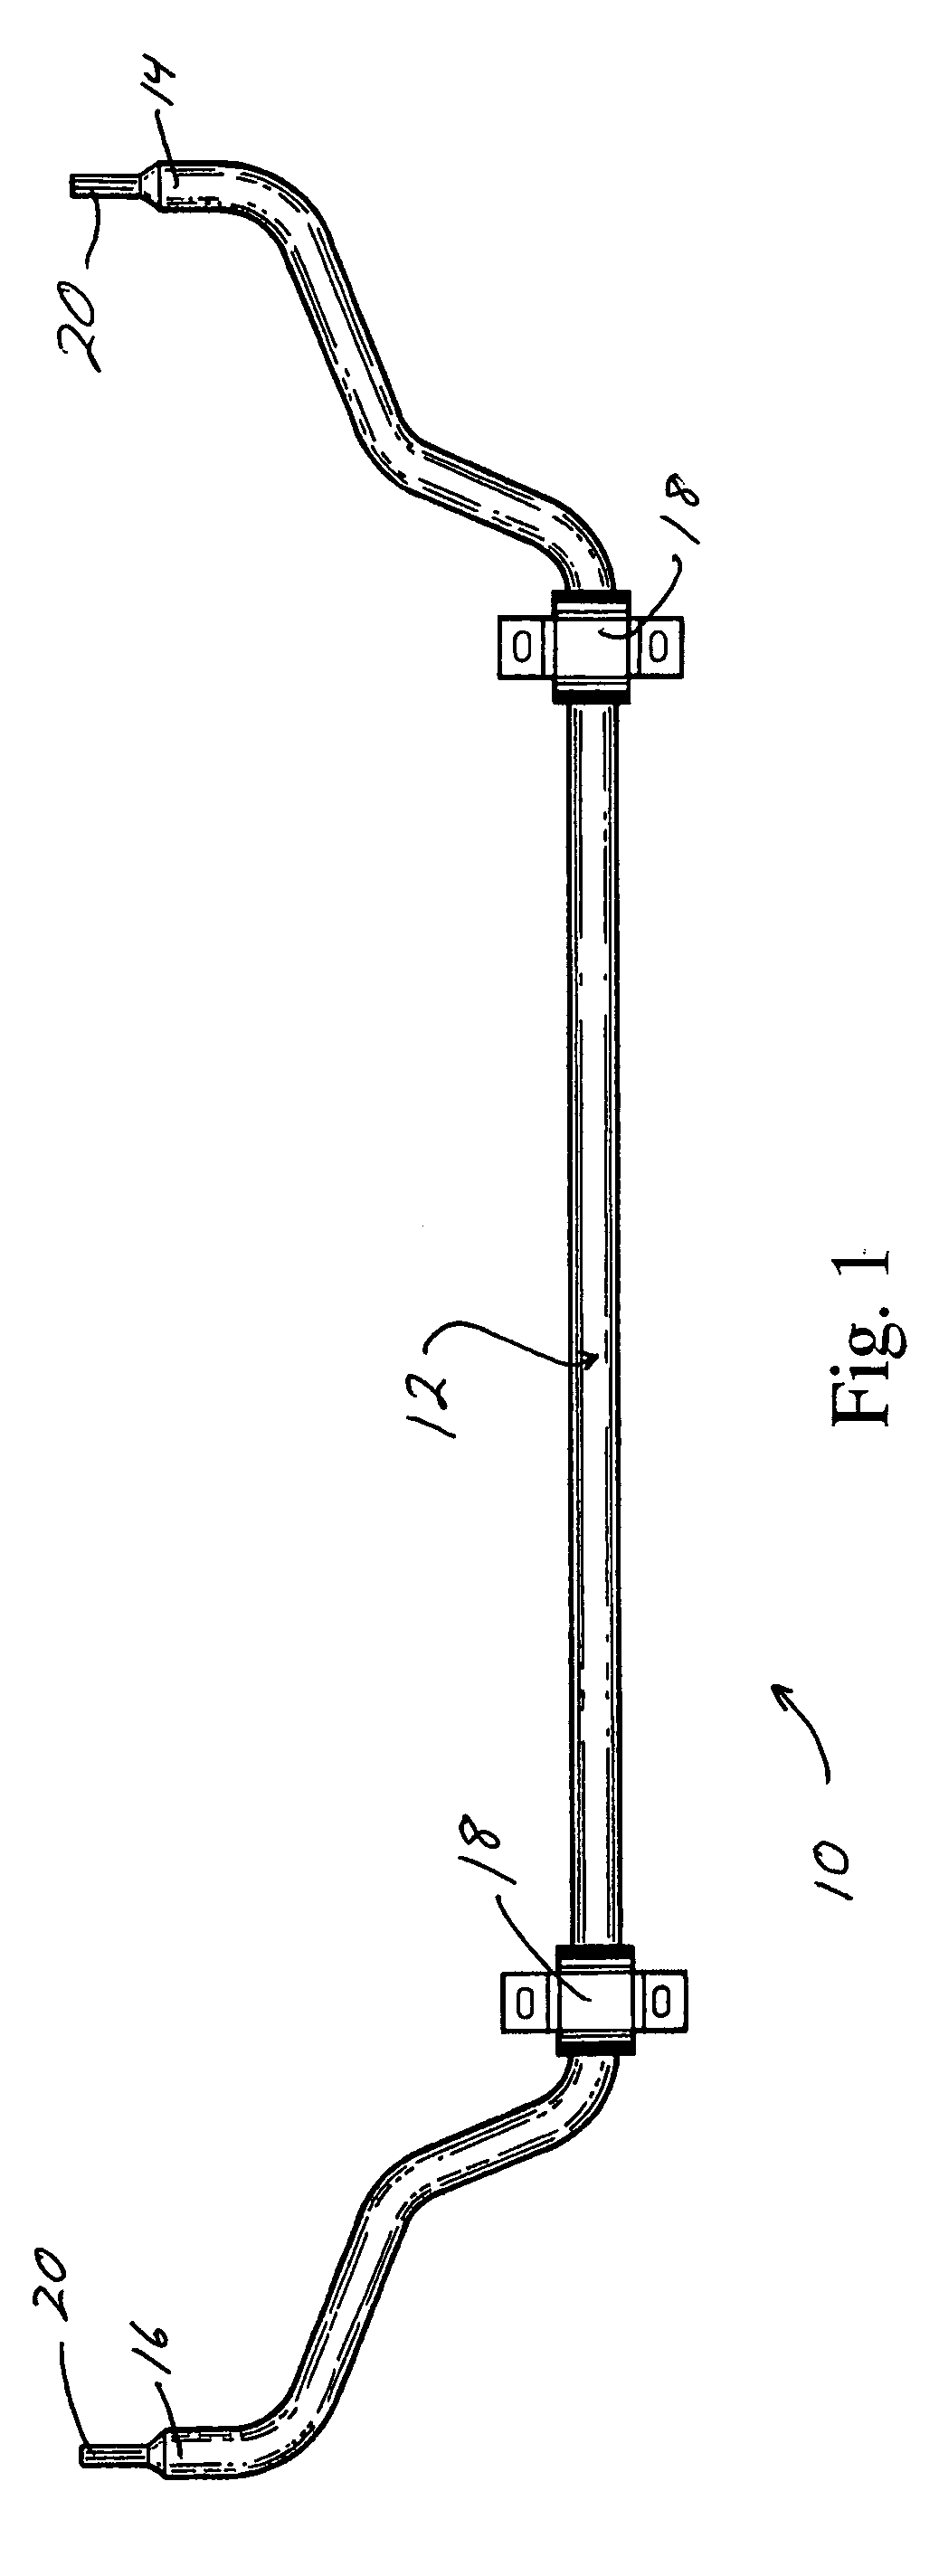 Suspension component having localized material strengthening